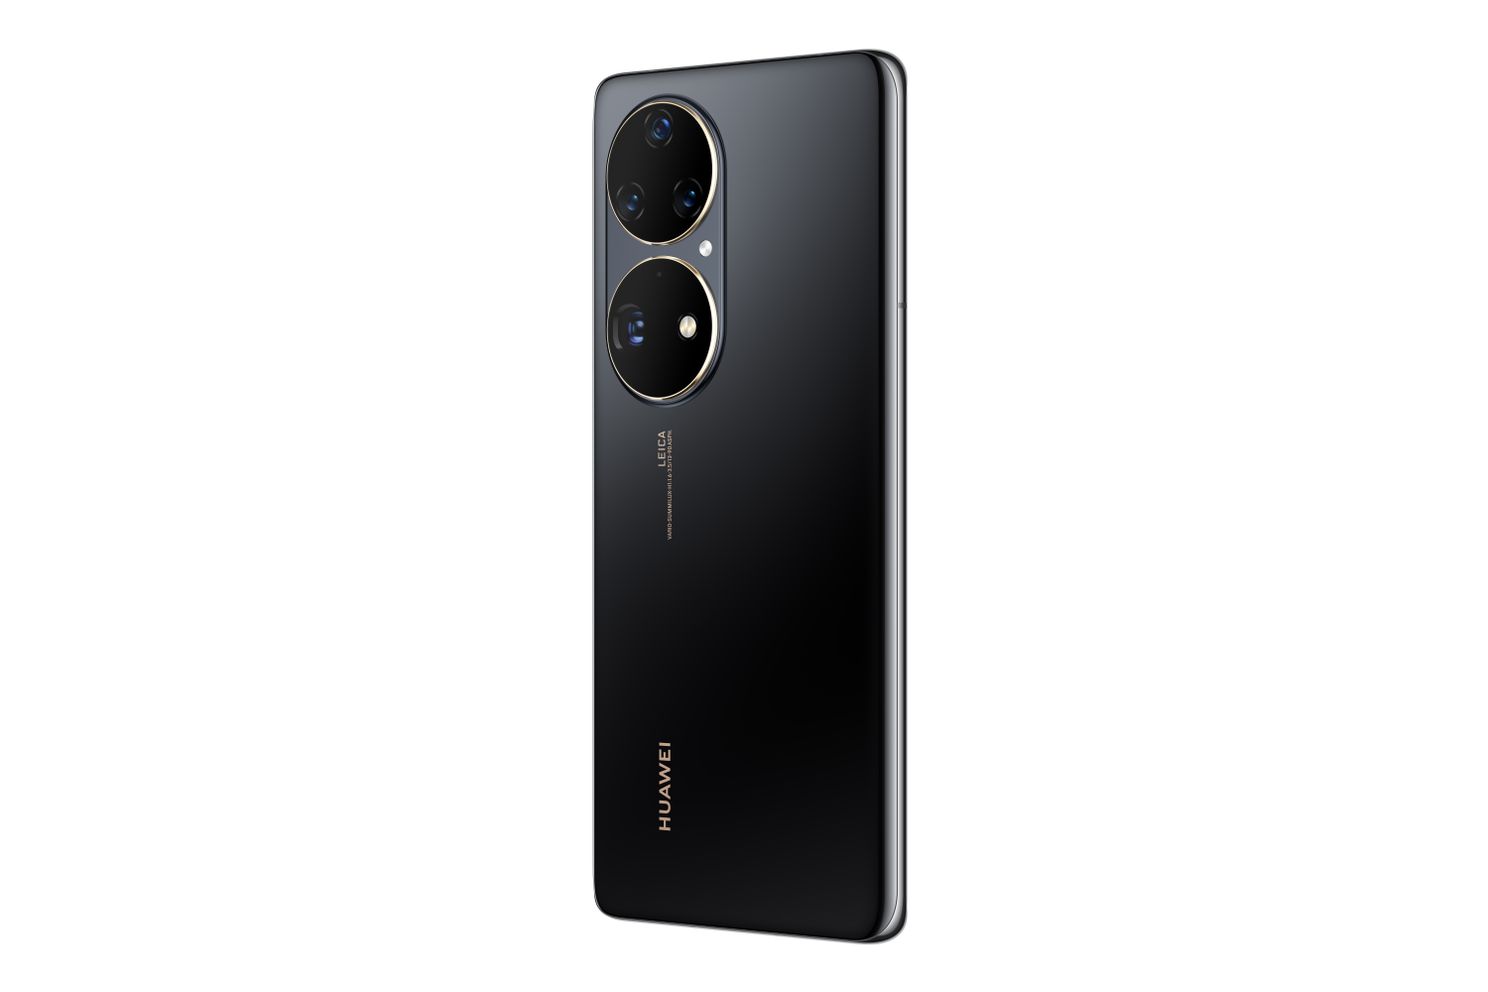 Huawei brings flagship P50 Pro to the Netherlands